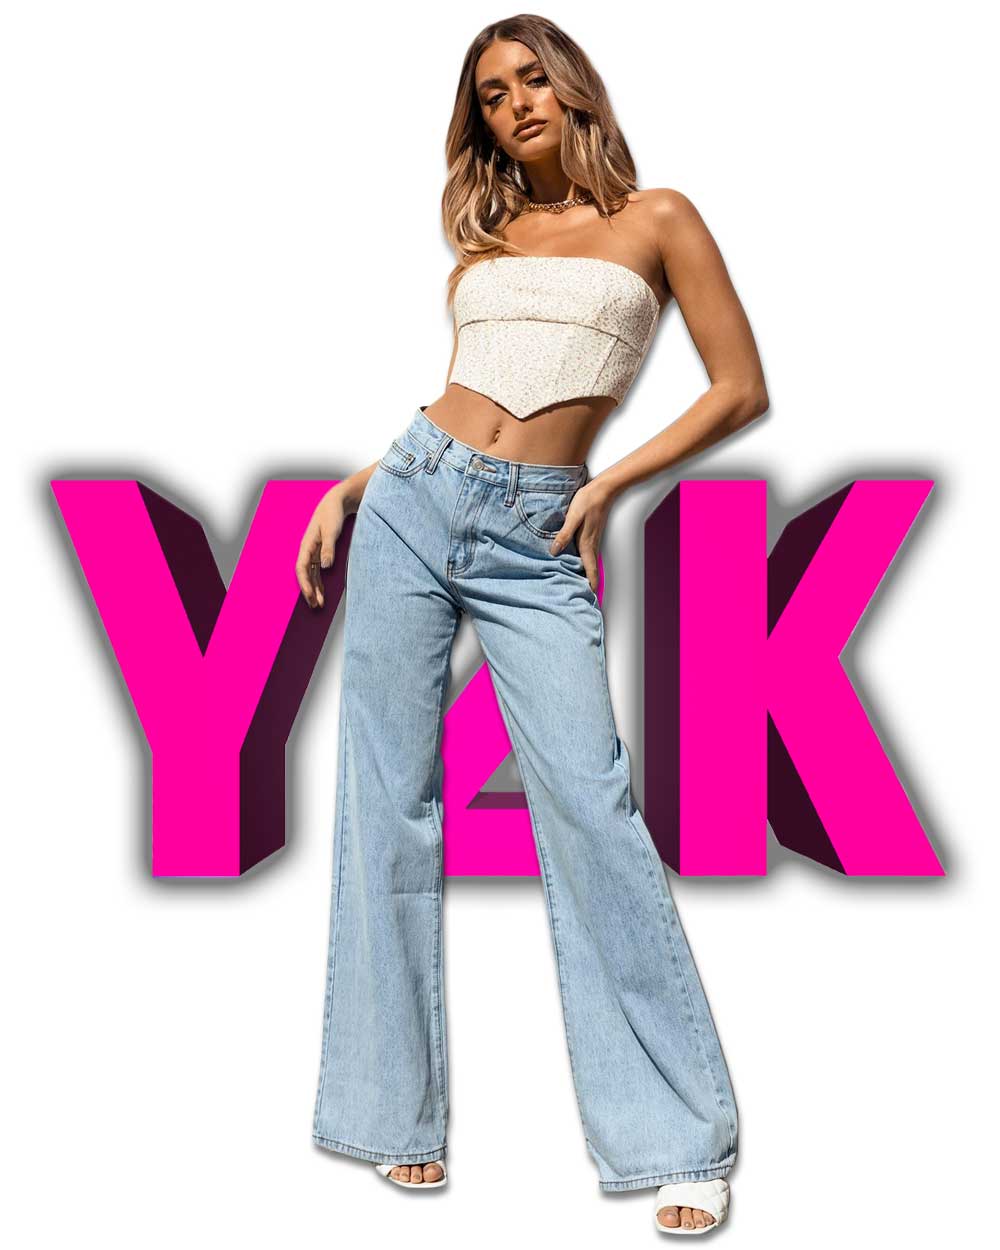 Nostalgia Meets Design: Incorporating Y2K Aesthetic into Your